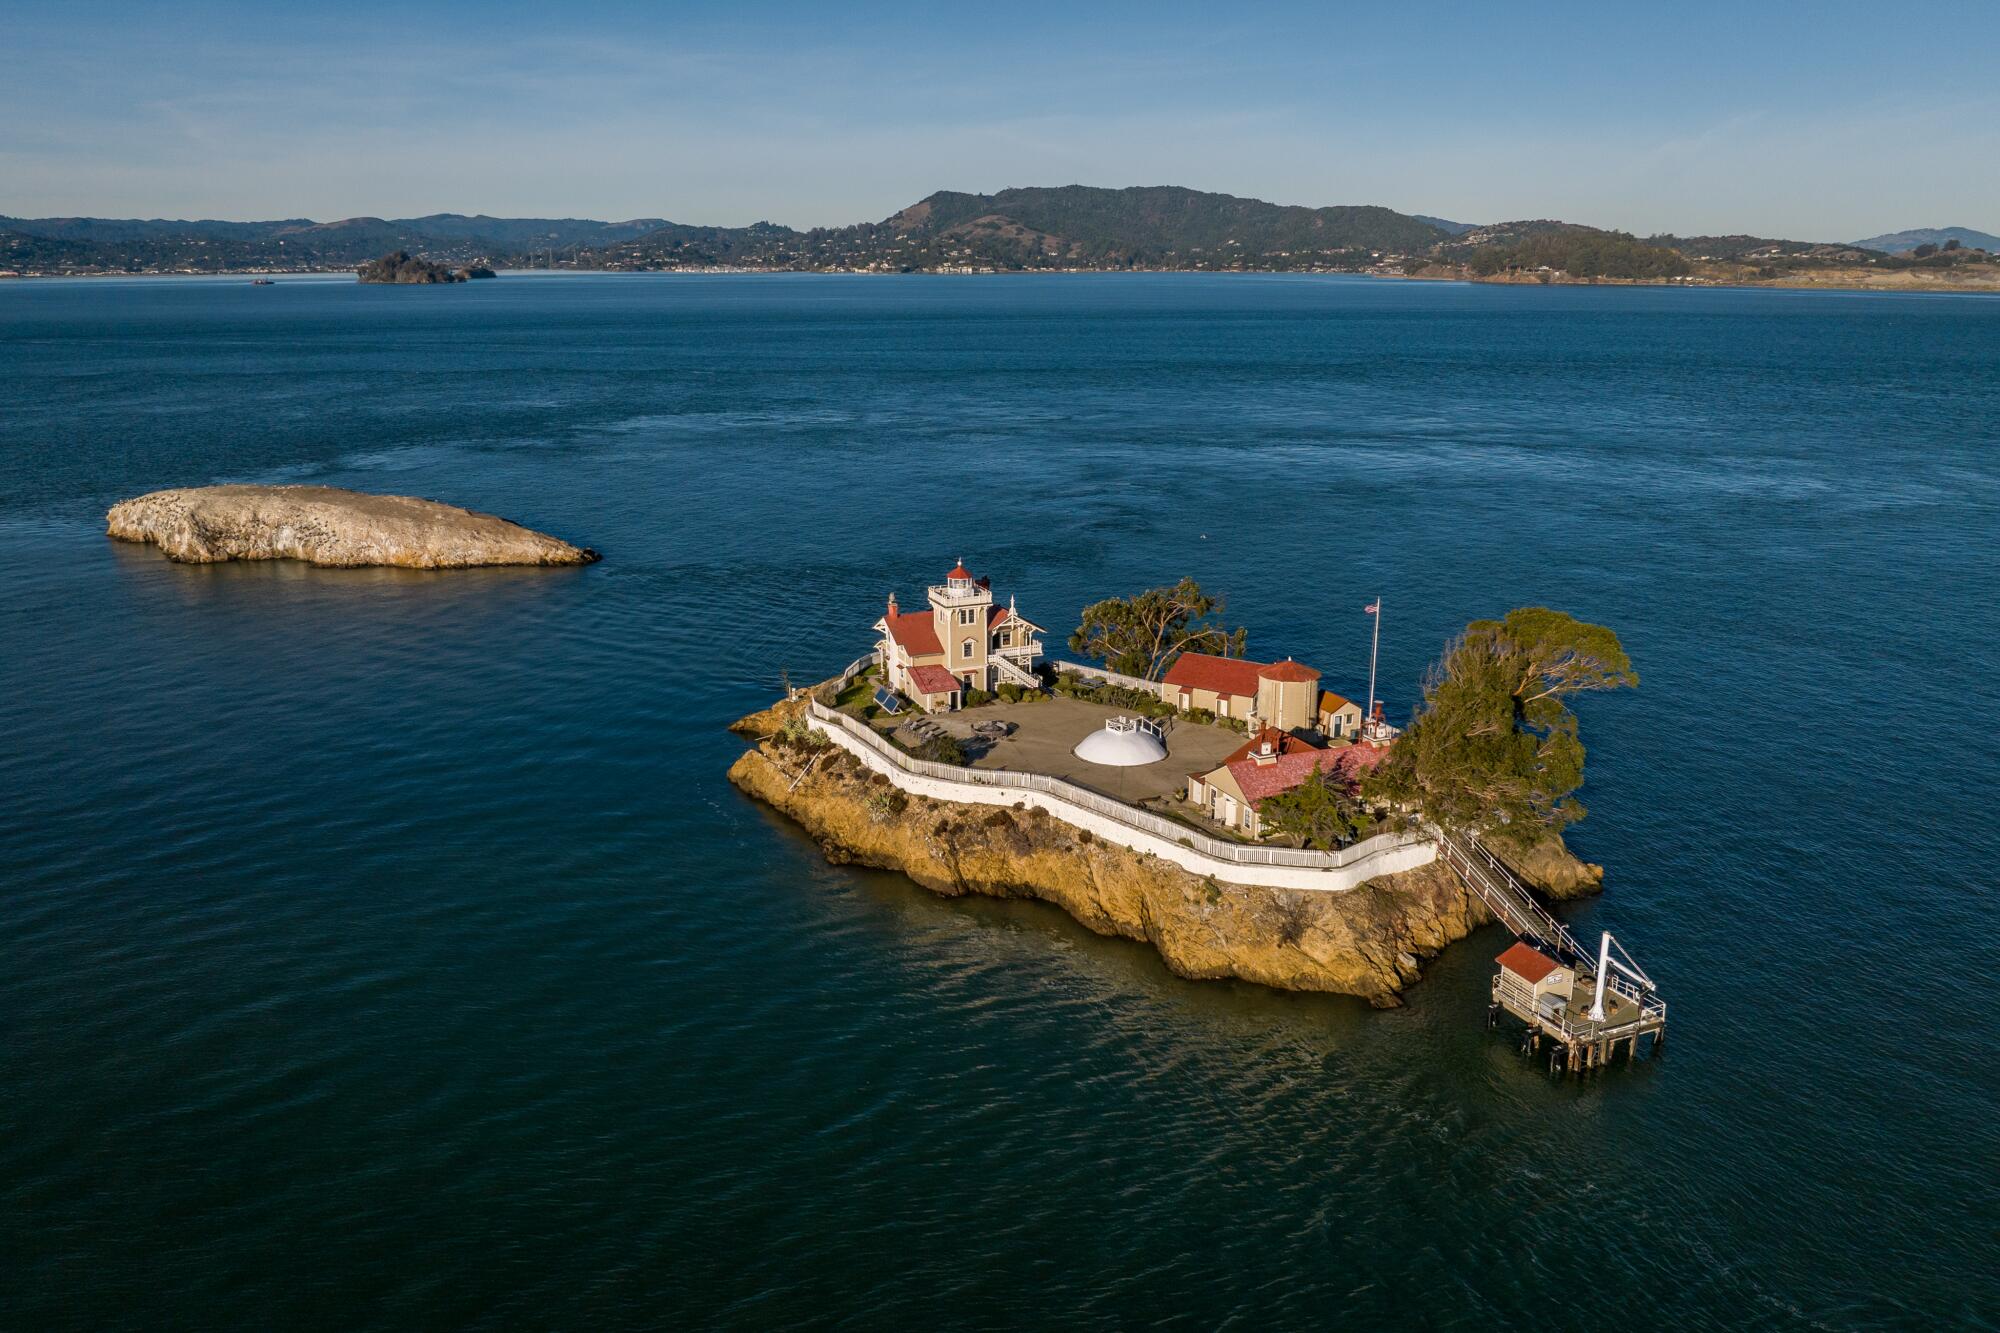 An island with a lighthouse and other buildings, with hills across the water in the background